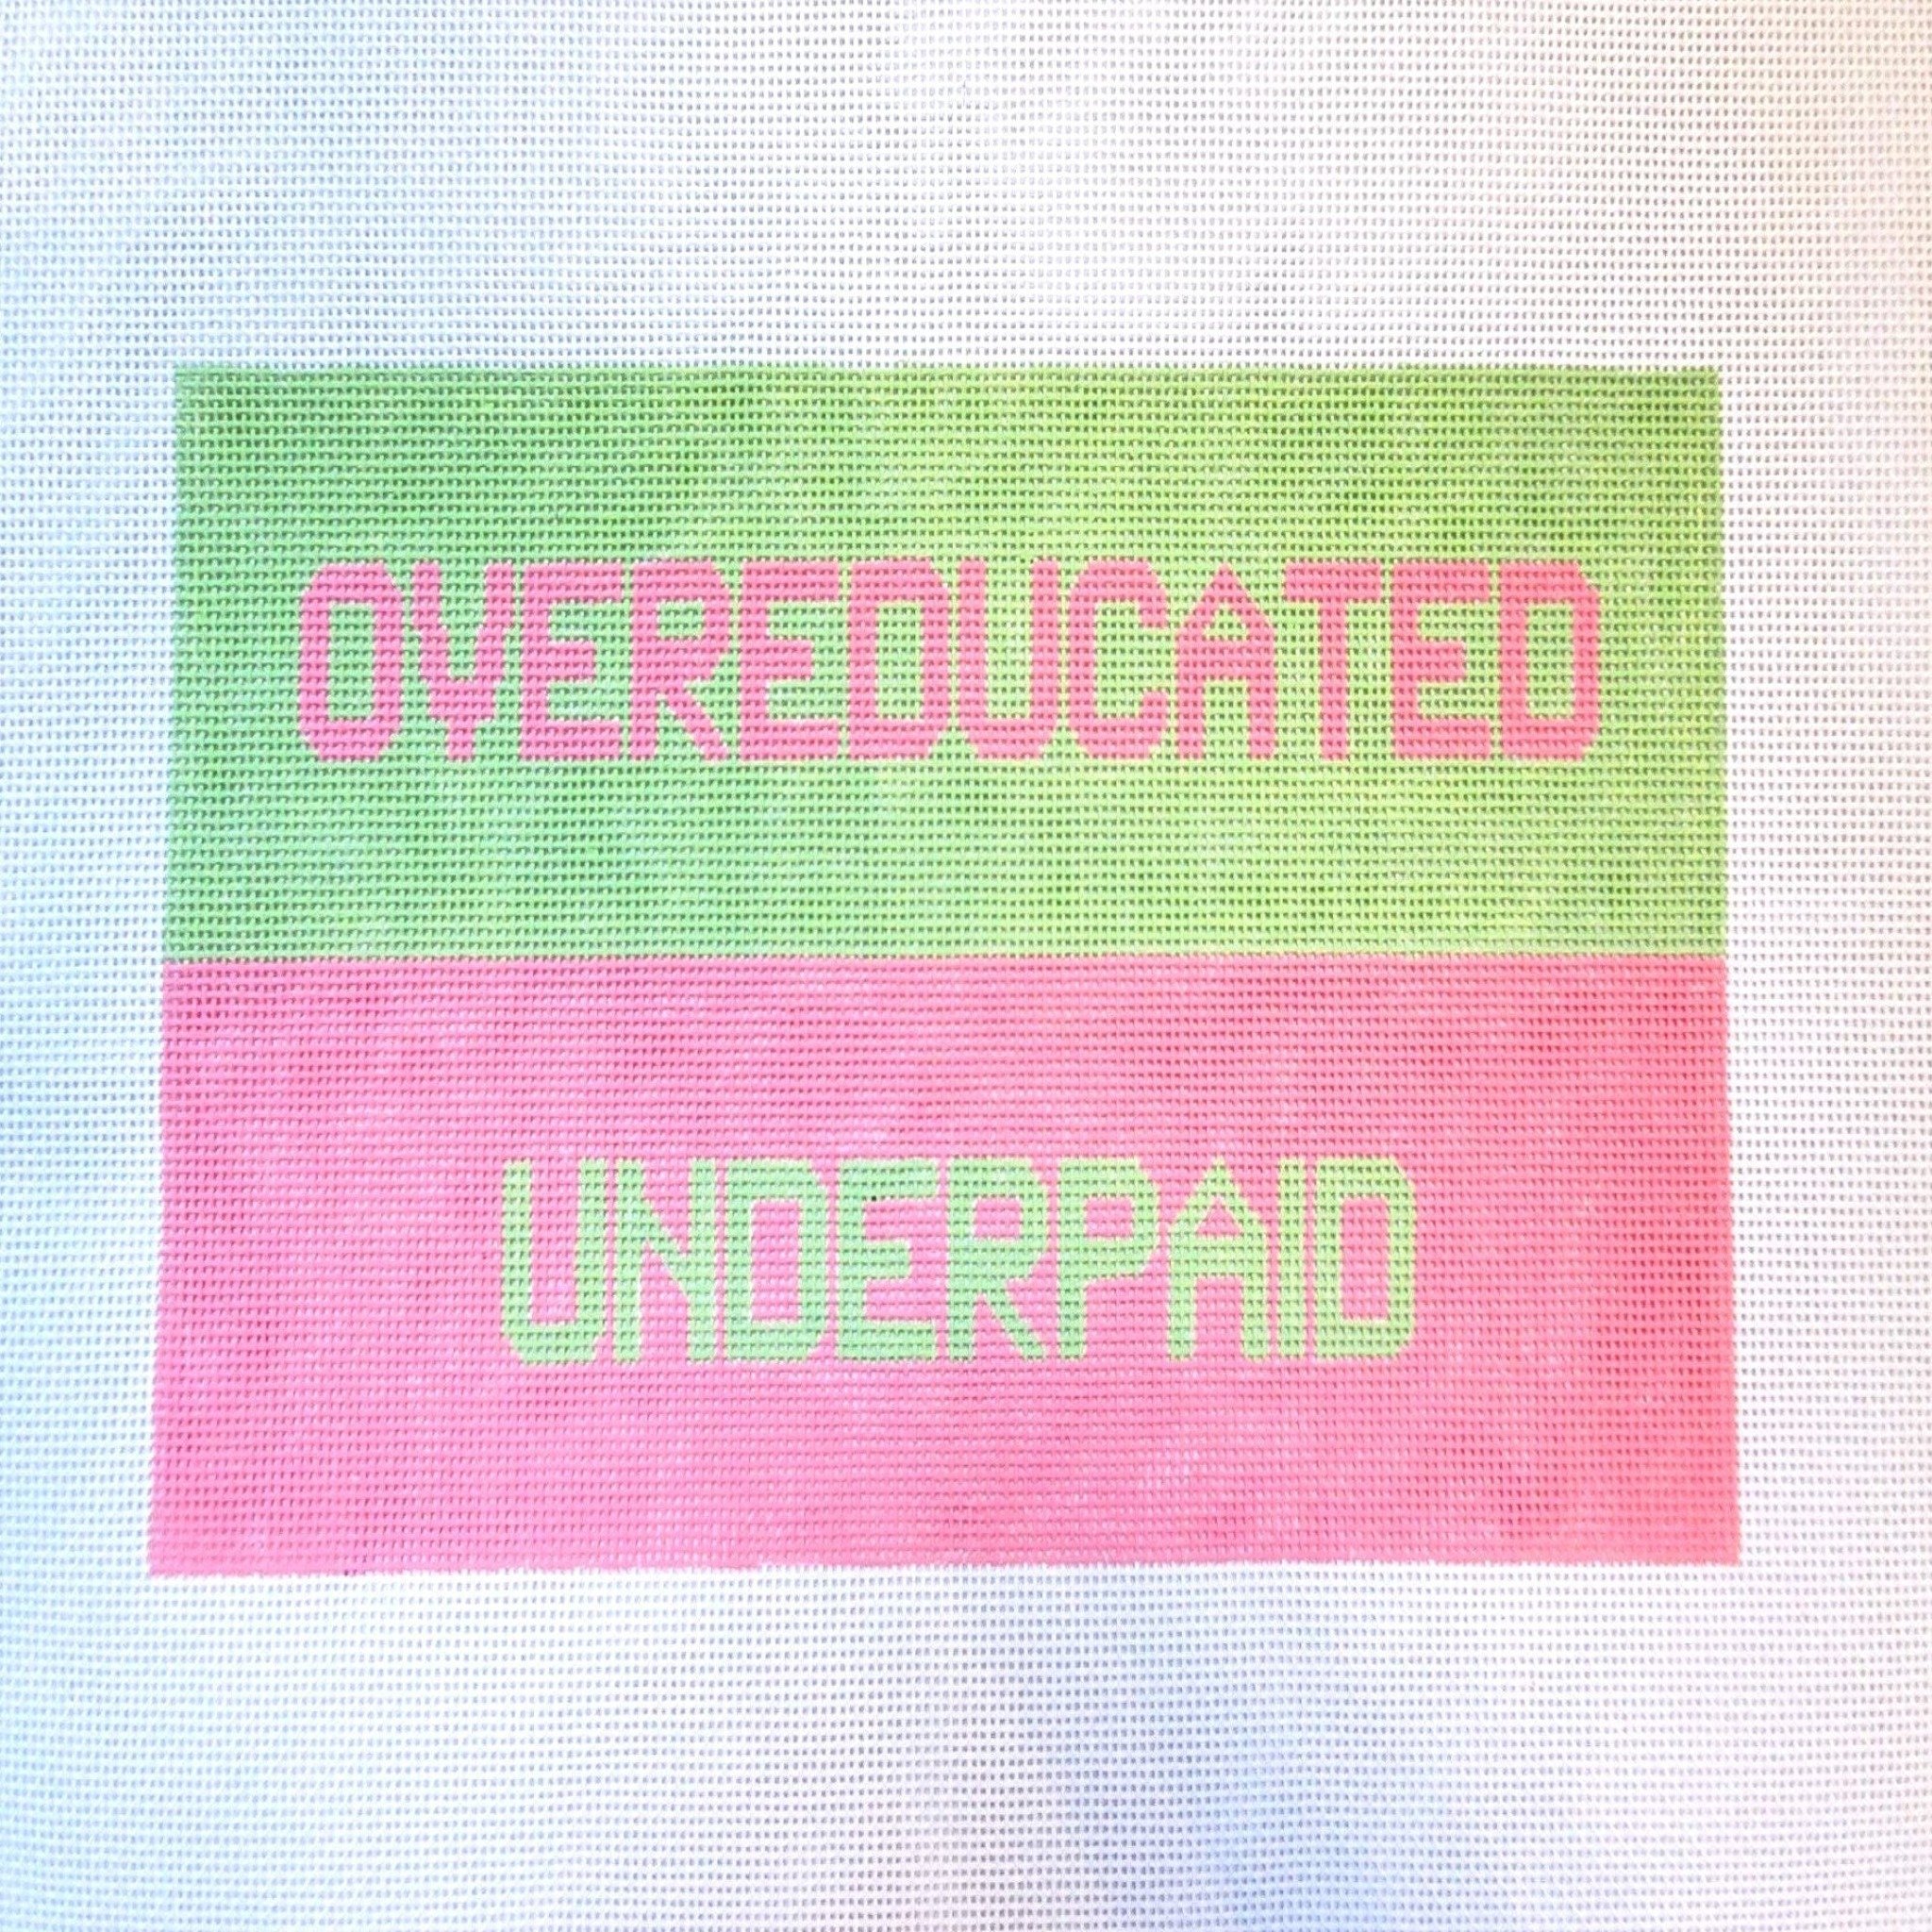 Overeducated, Underpaid